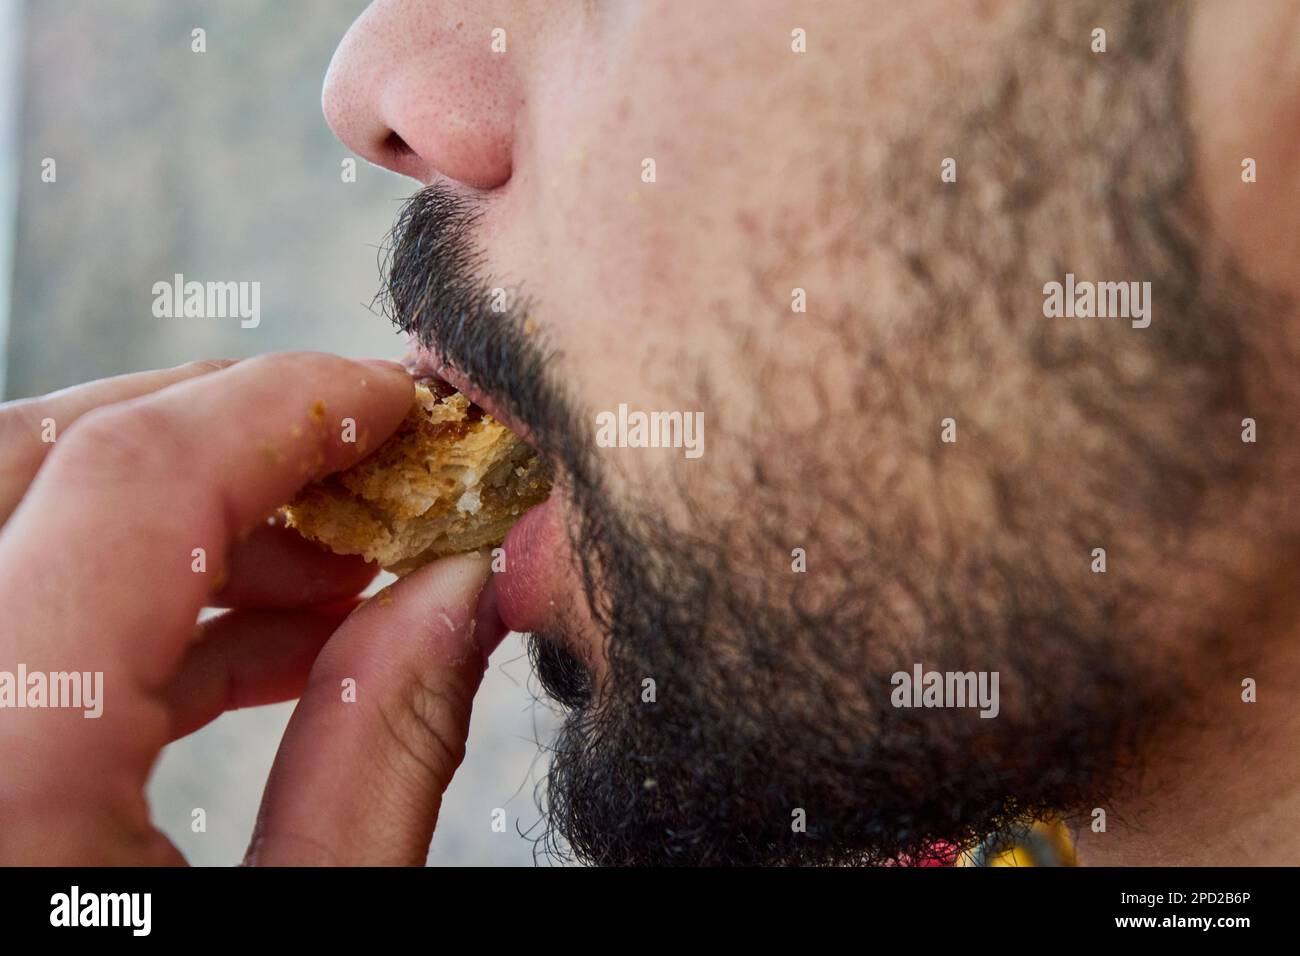 Mouth bites a piece of bread Stock Photo